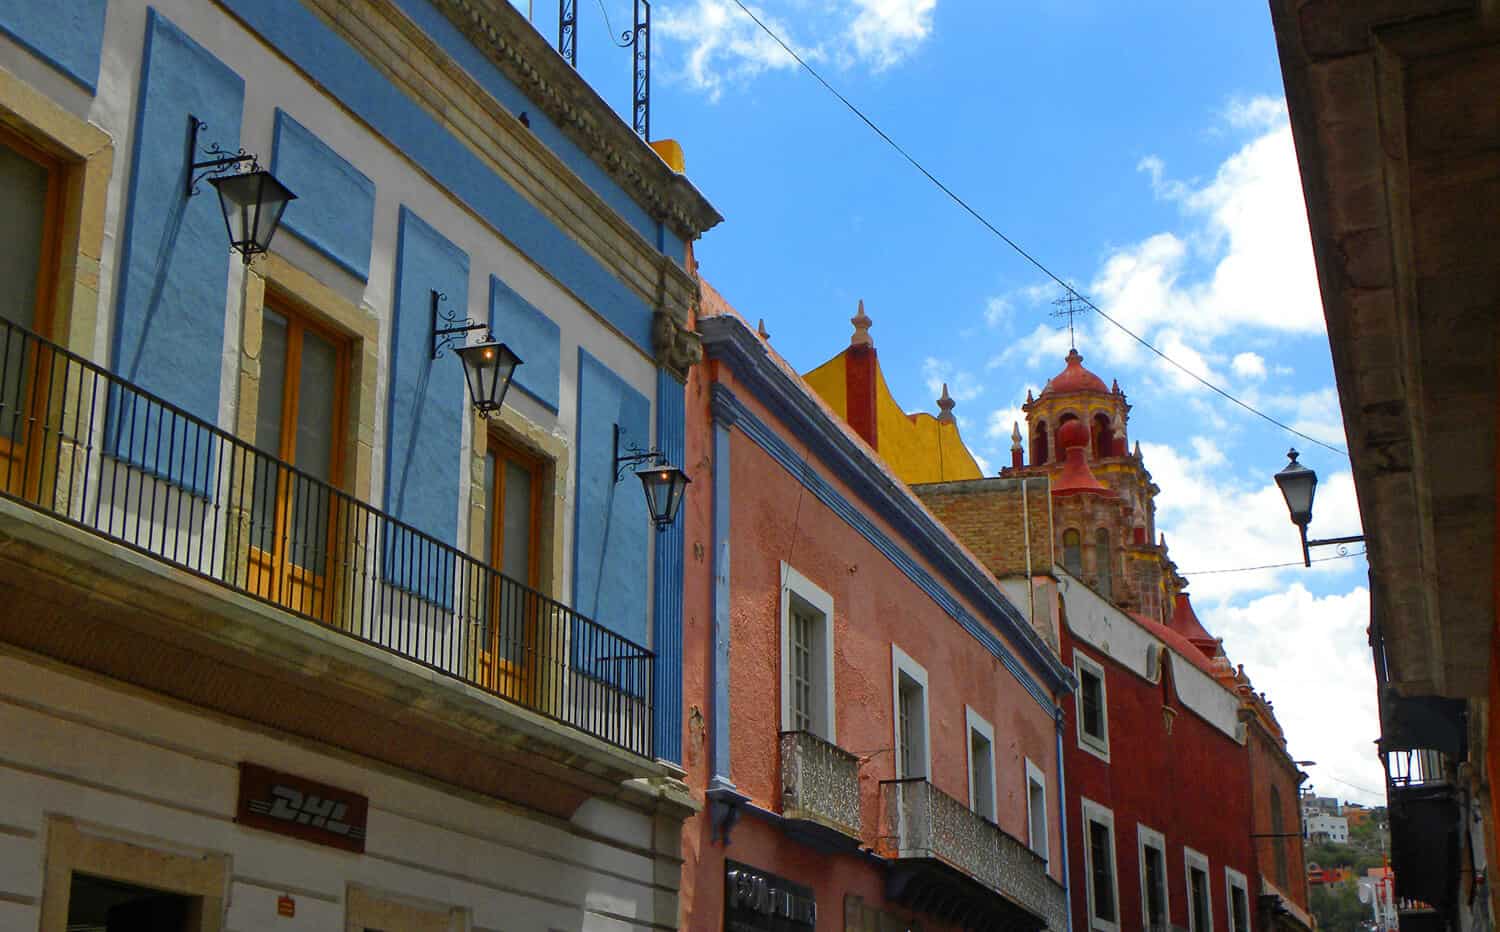 Is Guanajuato one of the most beautiful towns in the World?